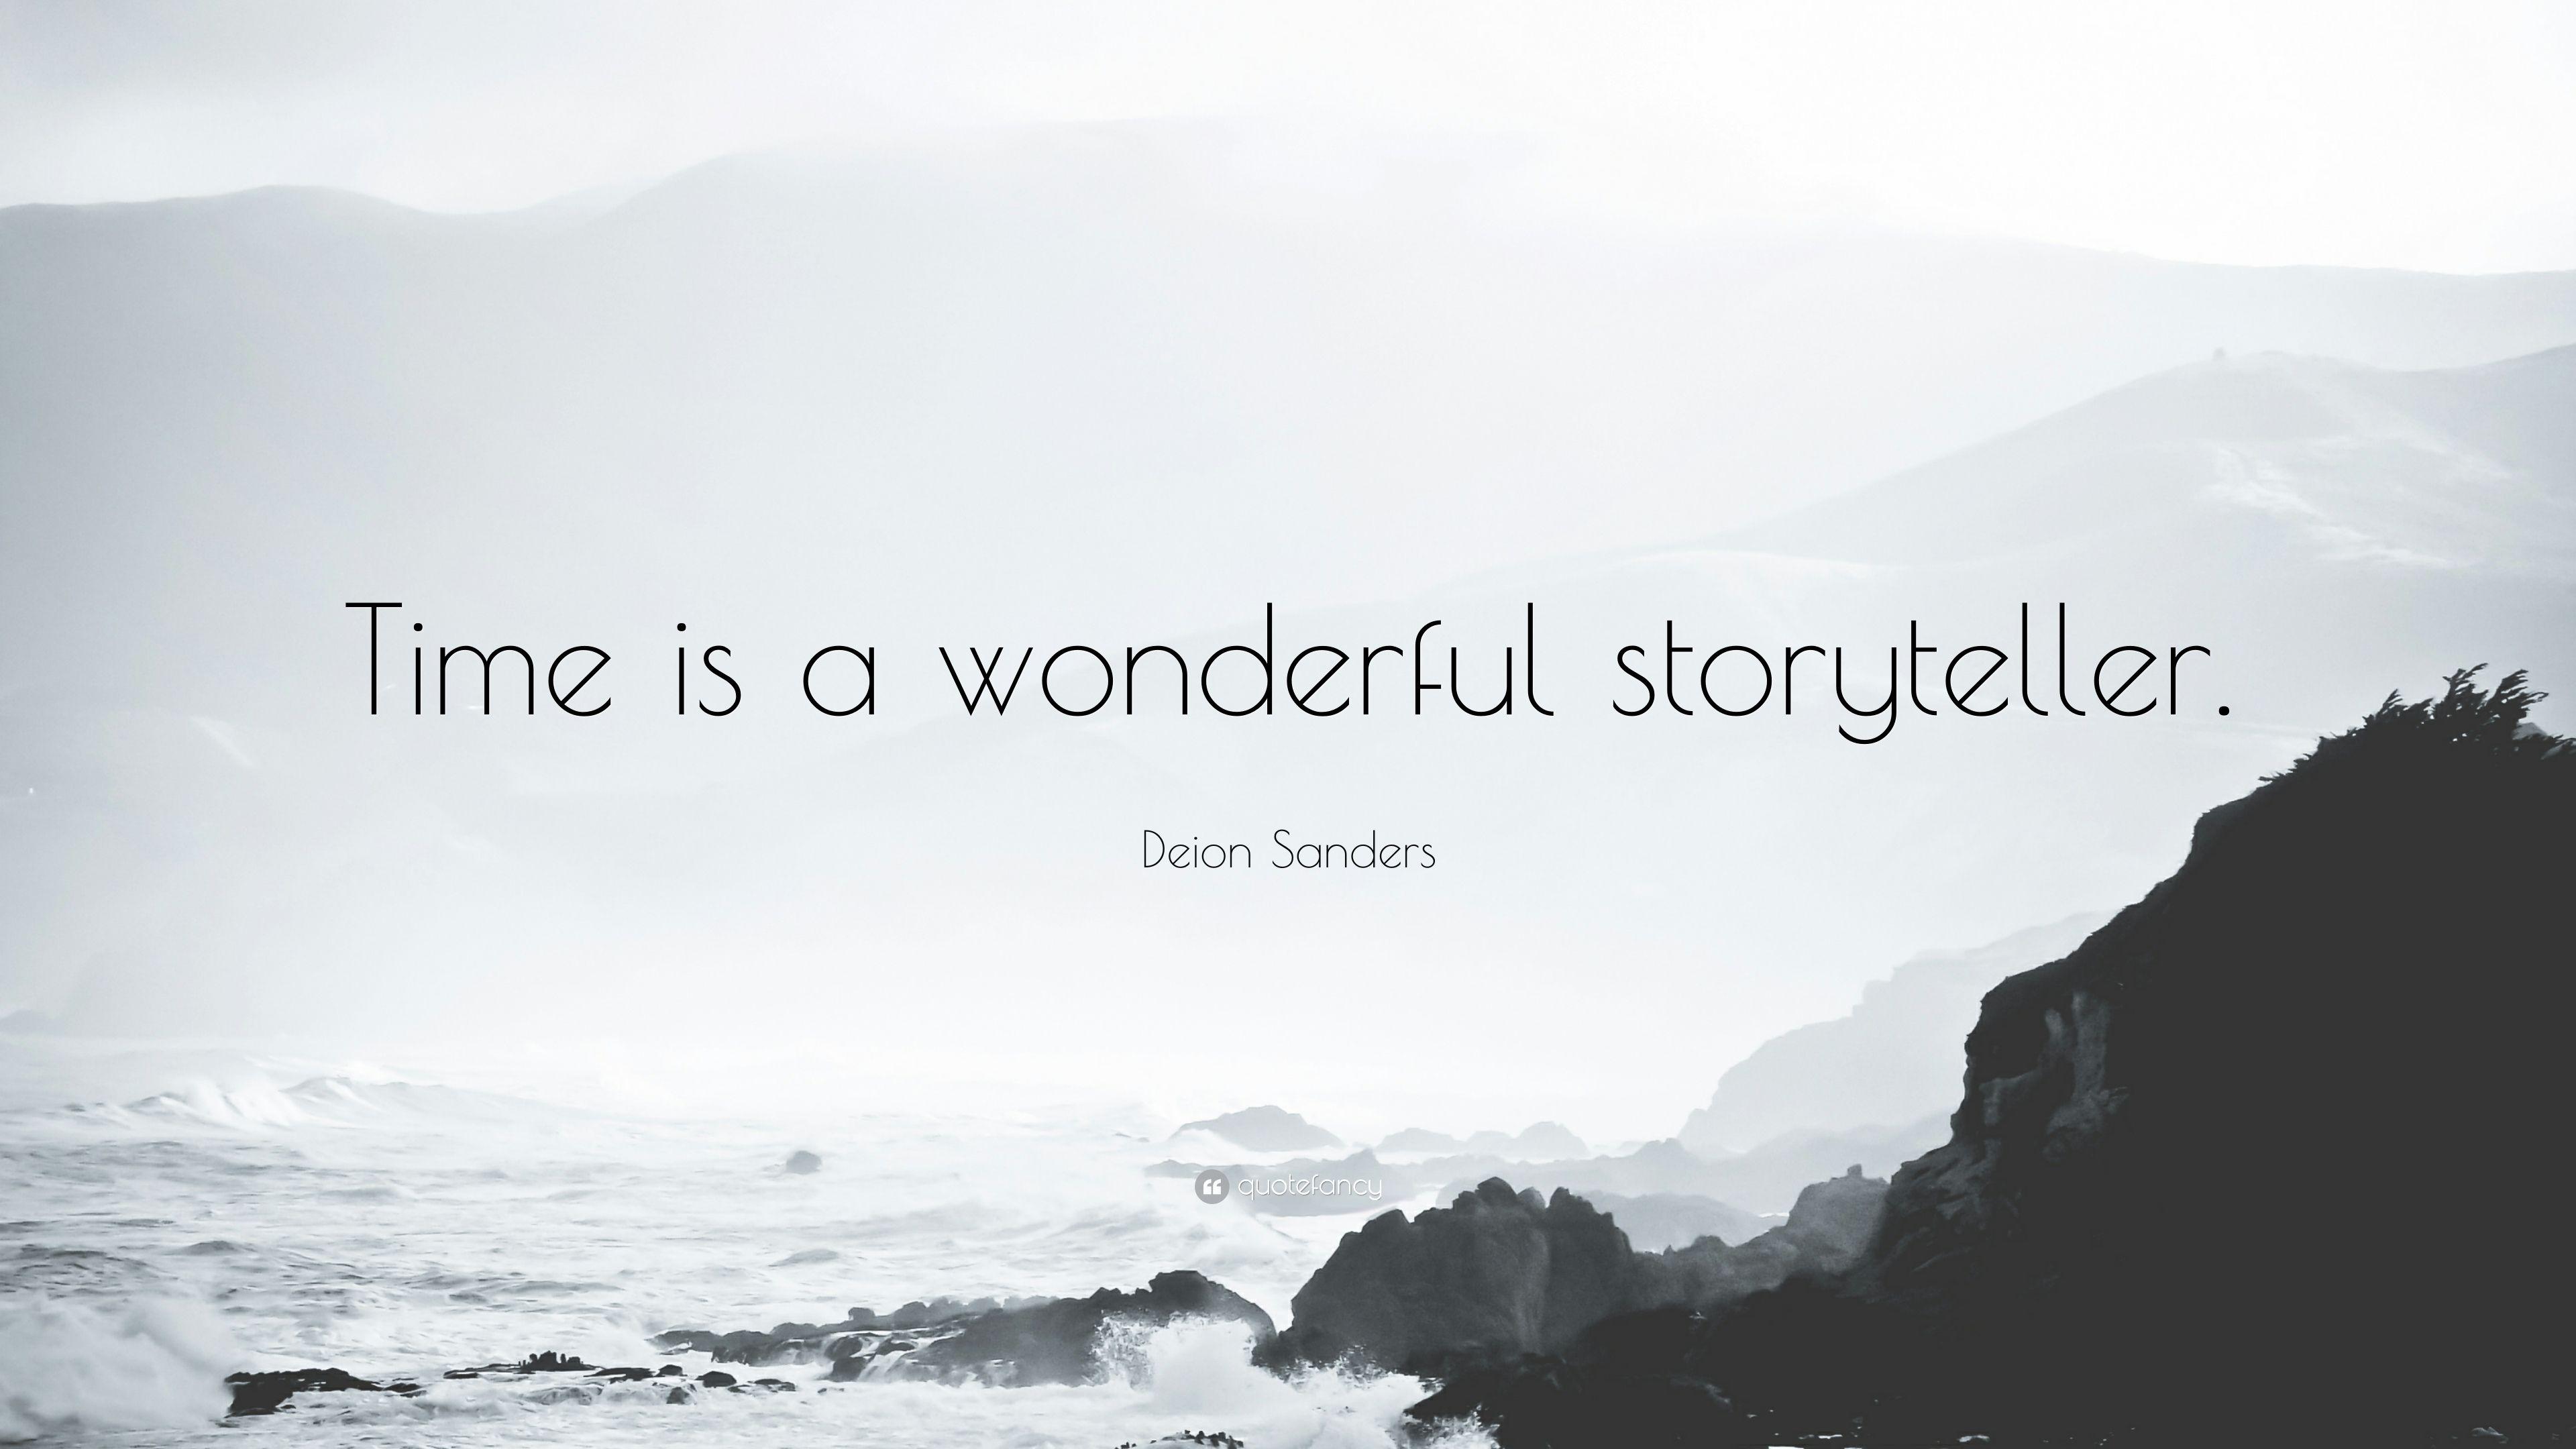 Deion Sanders Quote: “Time is a wonderful storyteller.” 7